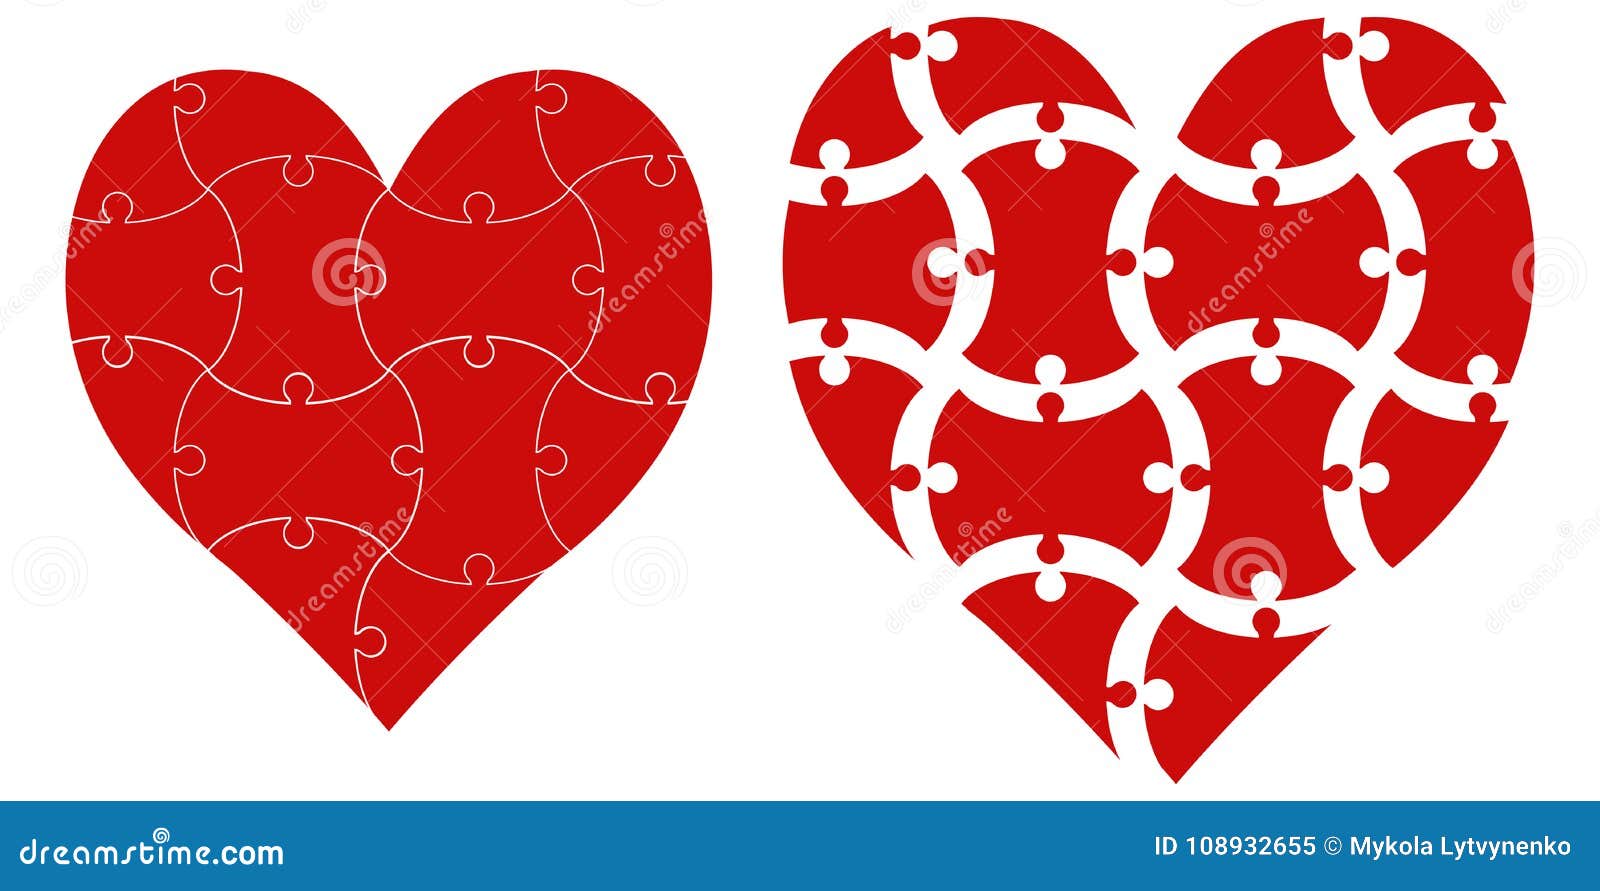 Heart Puzzle Template Stock Illustrations 5 208 Heart Puzzle Template Stock Illustrations Vectors Clipart Dreamstime